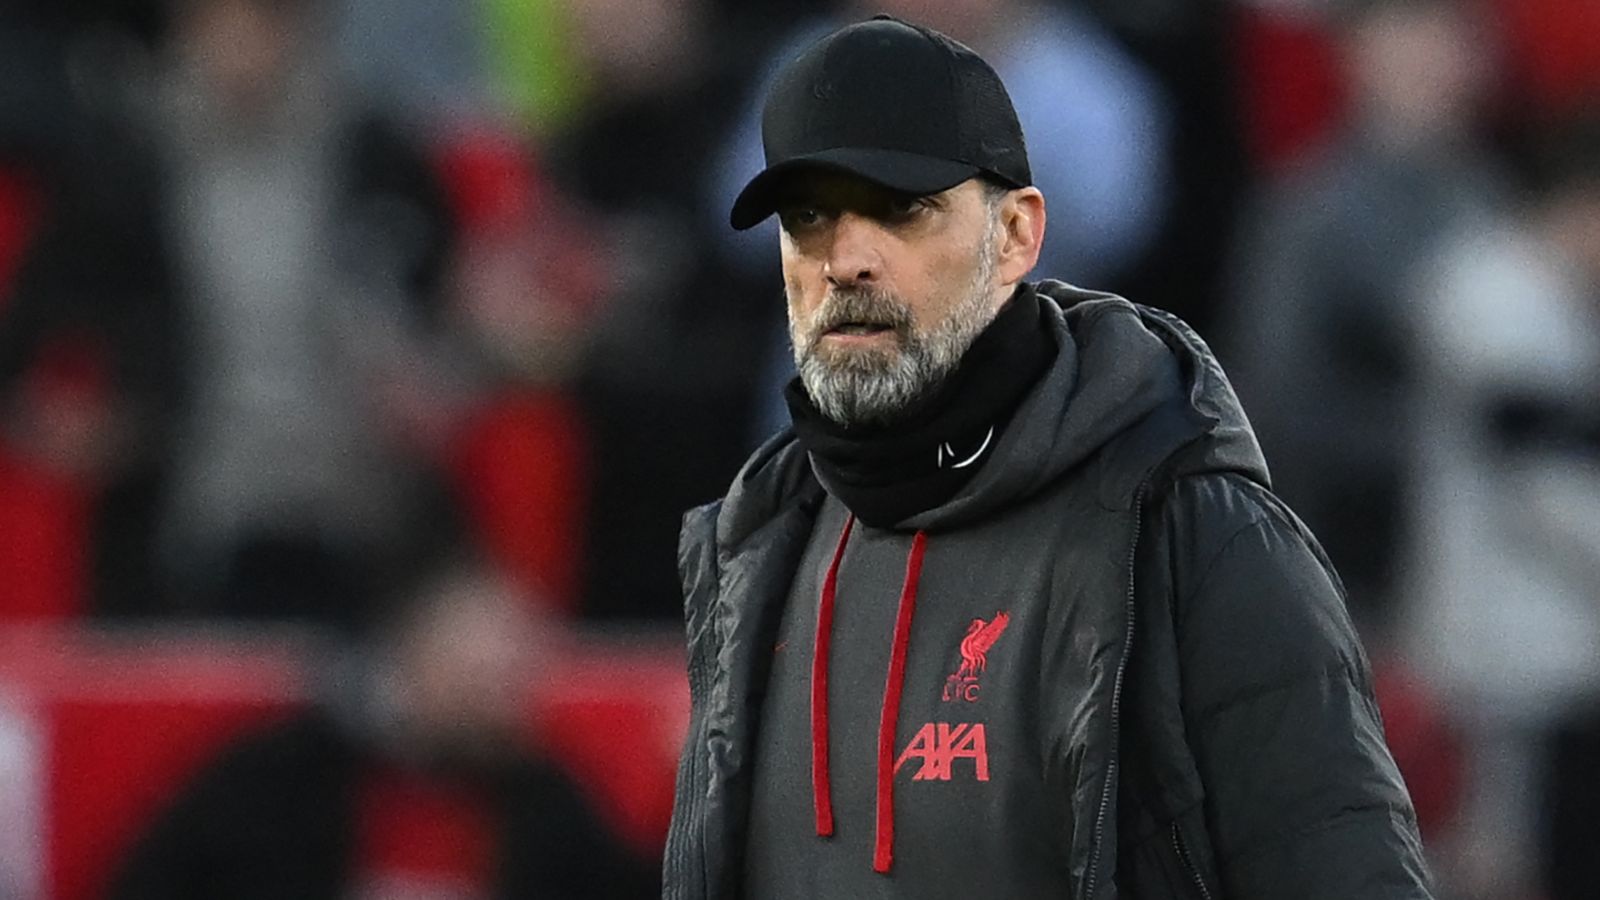 Manchester United 'can beat anyone' says Erik ten Hag, as Liverpool manager Jurgen Klopp loses cool with reporter | Football News